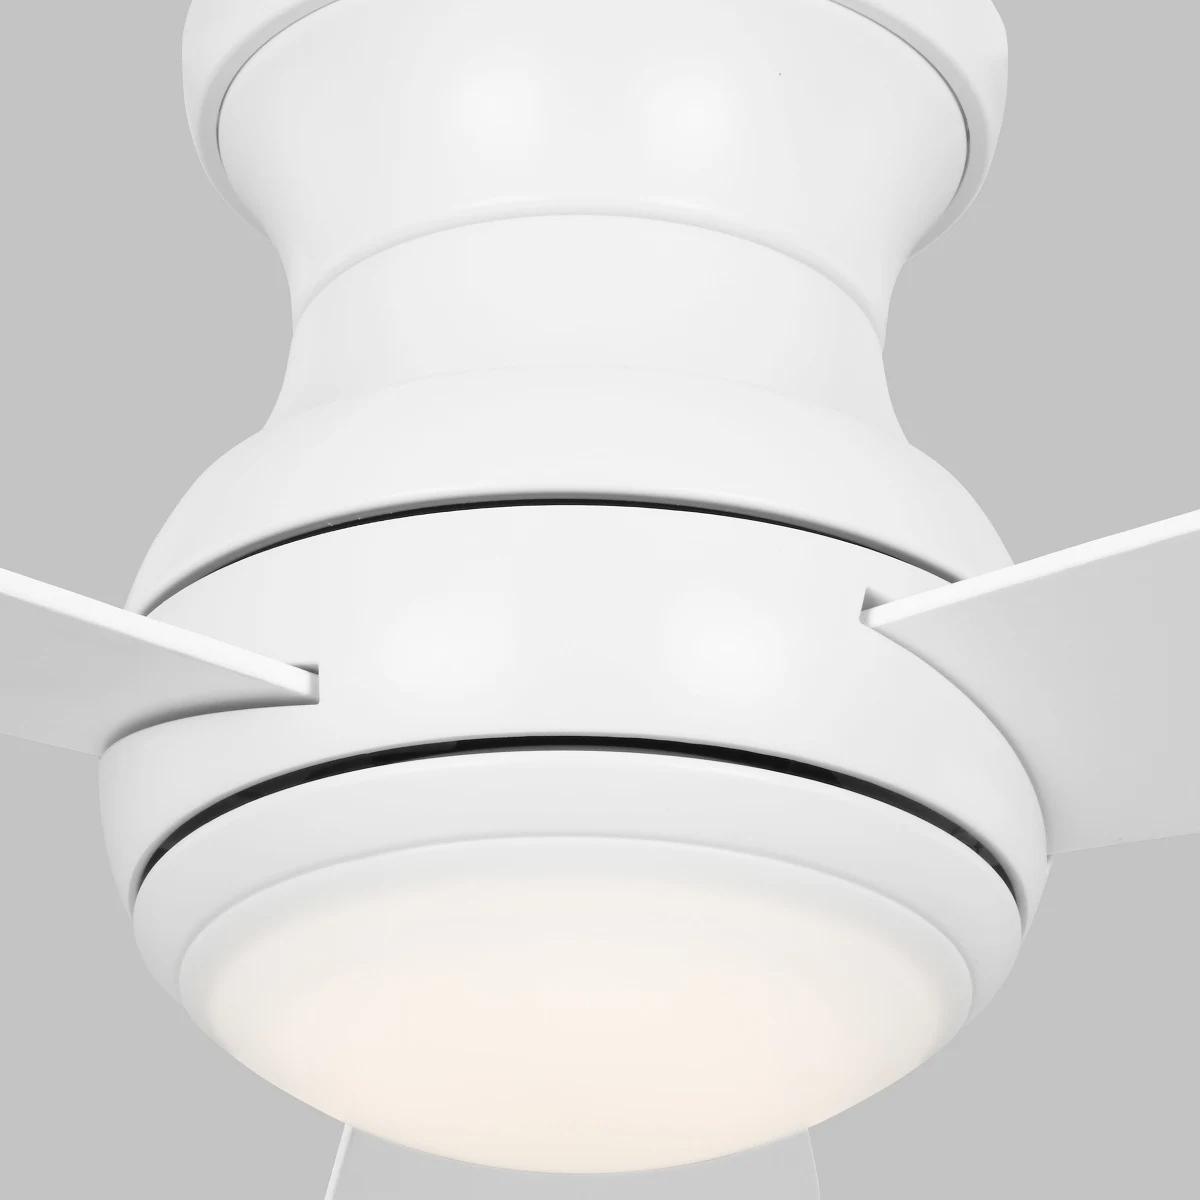 Orbis 52 Inch Hugger LED Ceiling Fan With Wall Control - Bees Lighting